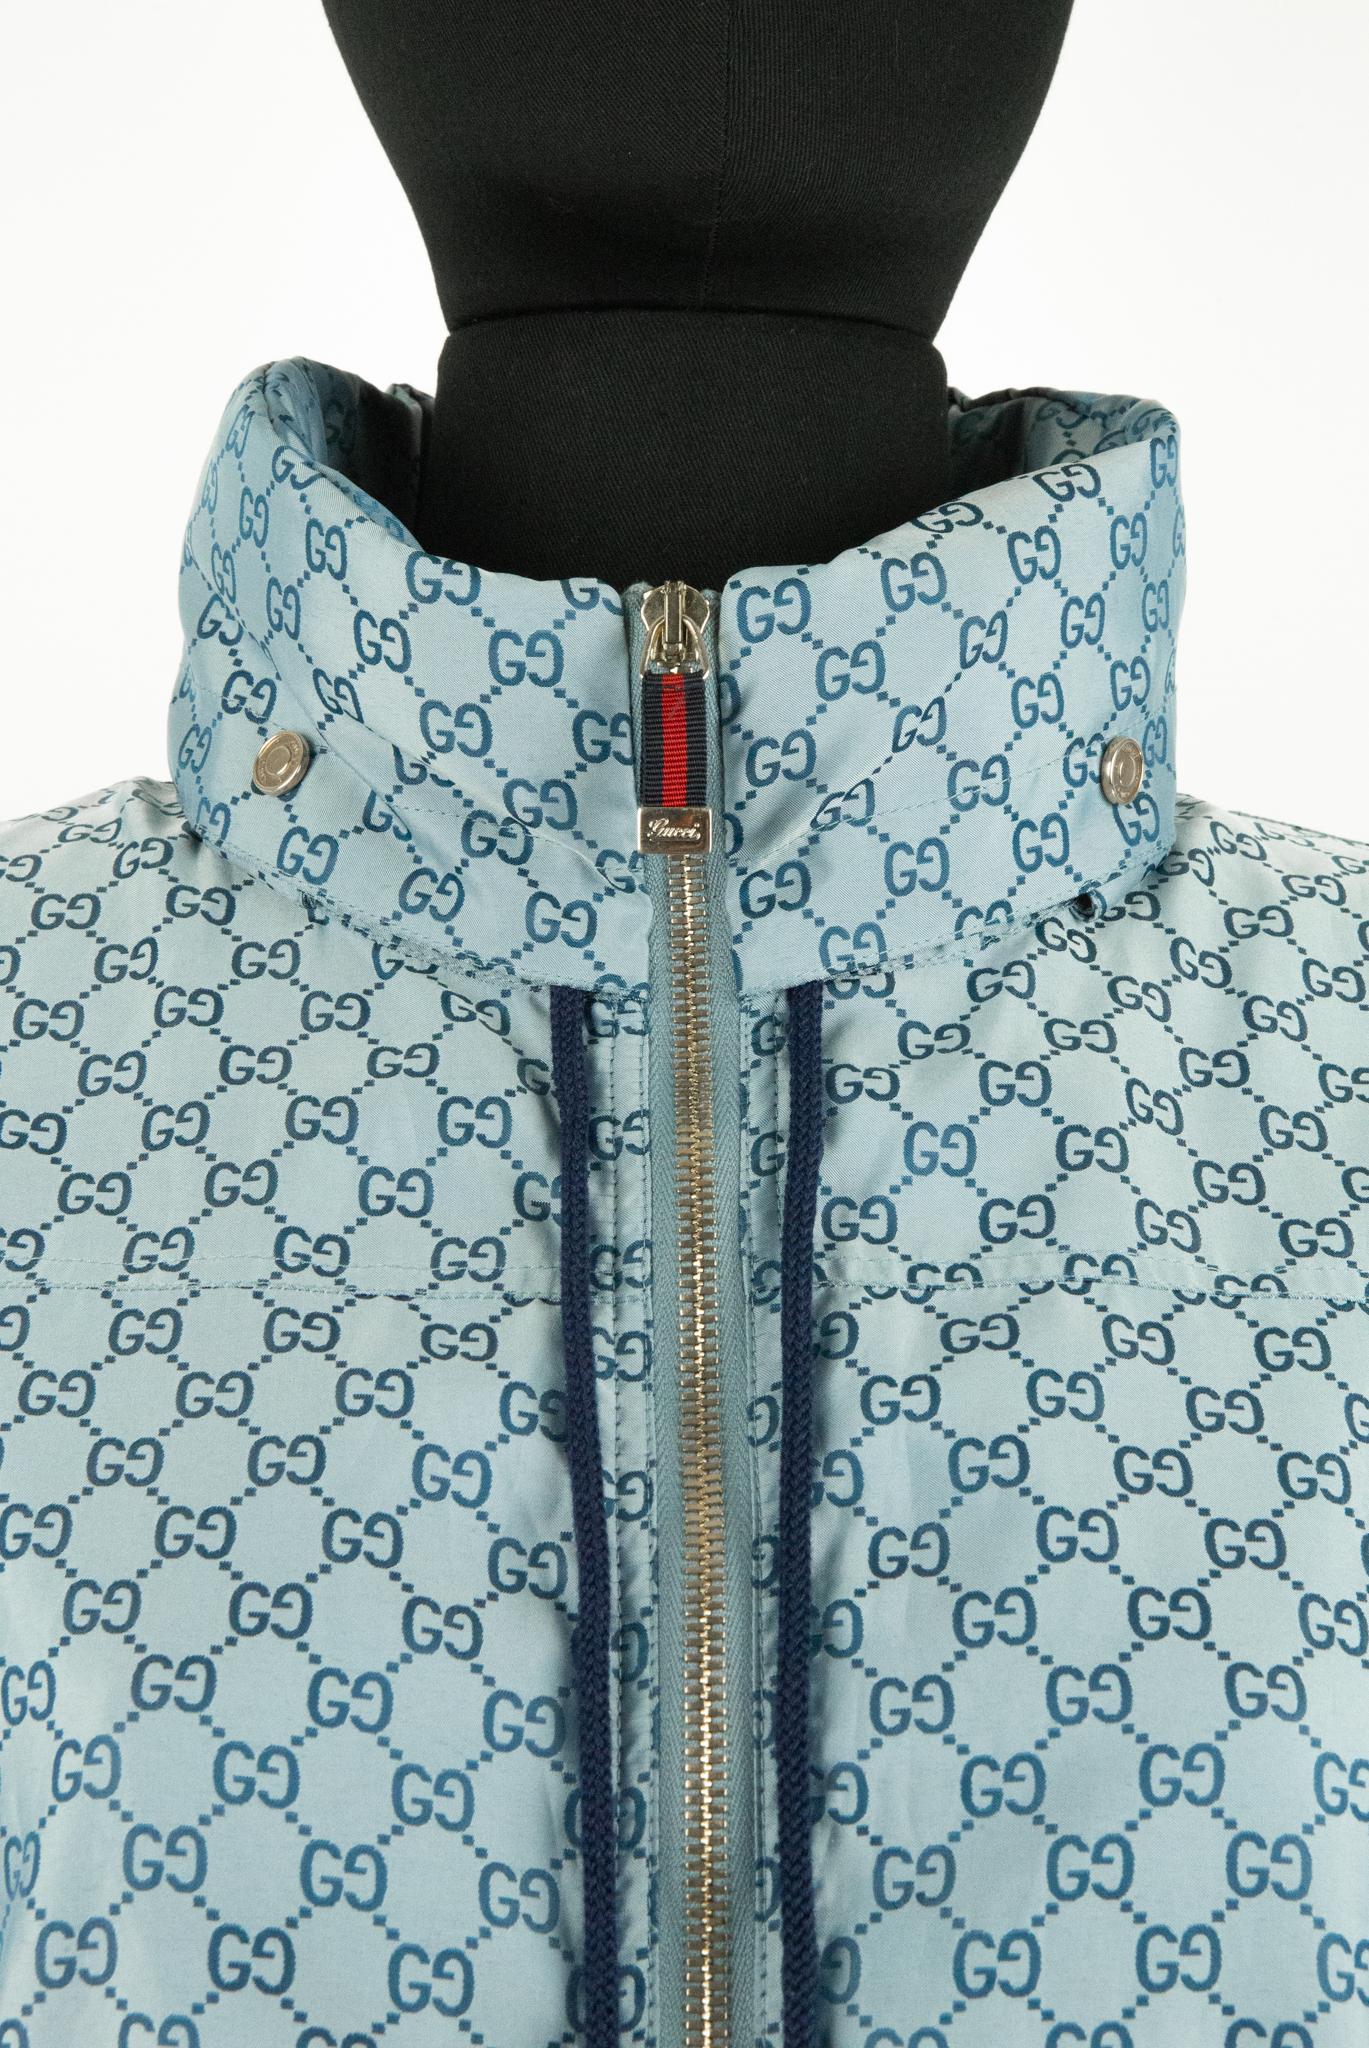 A 2008 Gucci zip-up jacket with a hood. This jacket features an all-over monogram, elasticated waistband, cuffs and toggles in black with silver cuffs to adjust the hood. At the front are two pockets at either side of the zip. The Zip toggle is